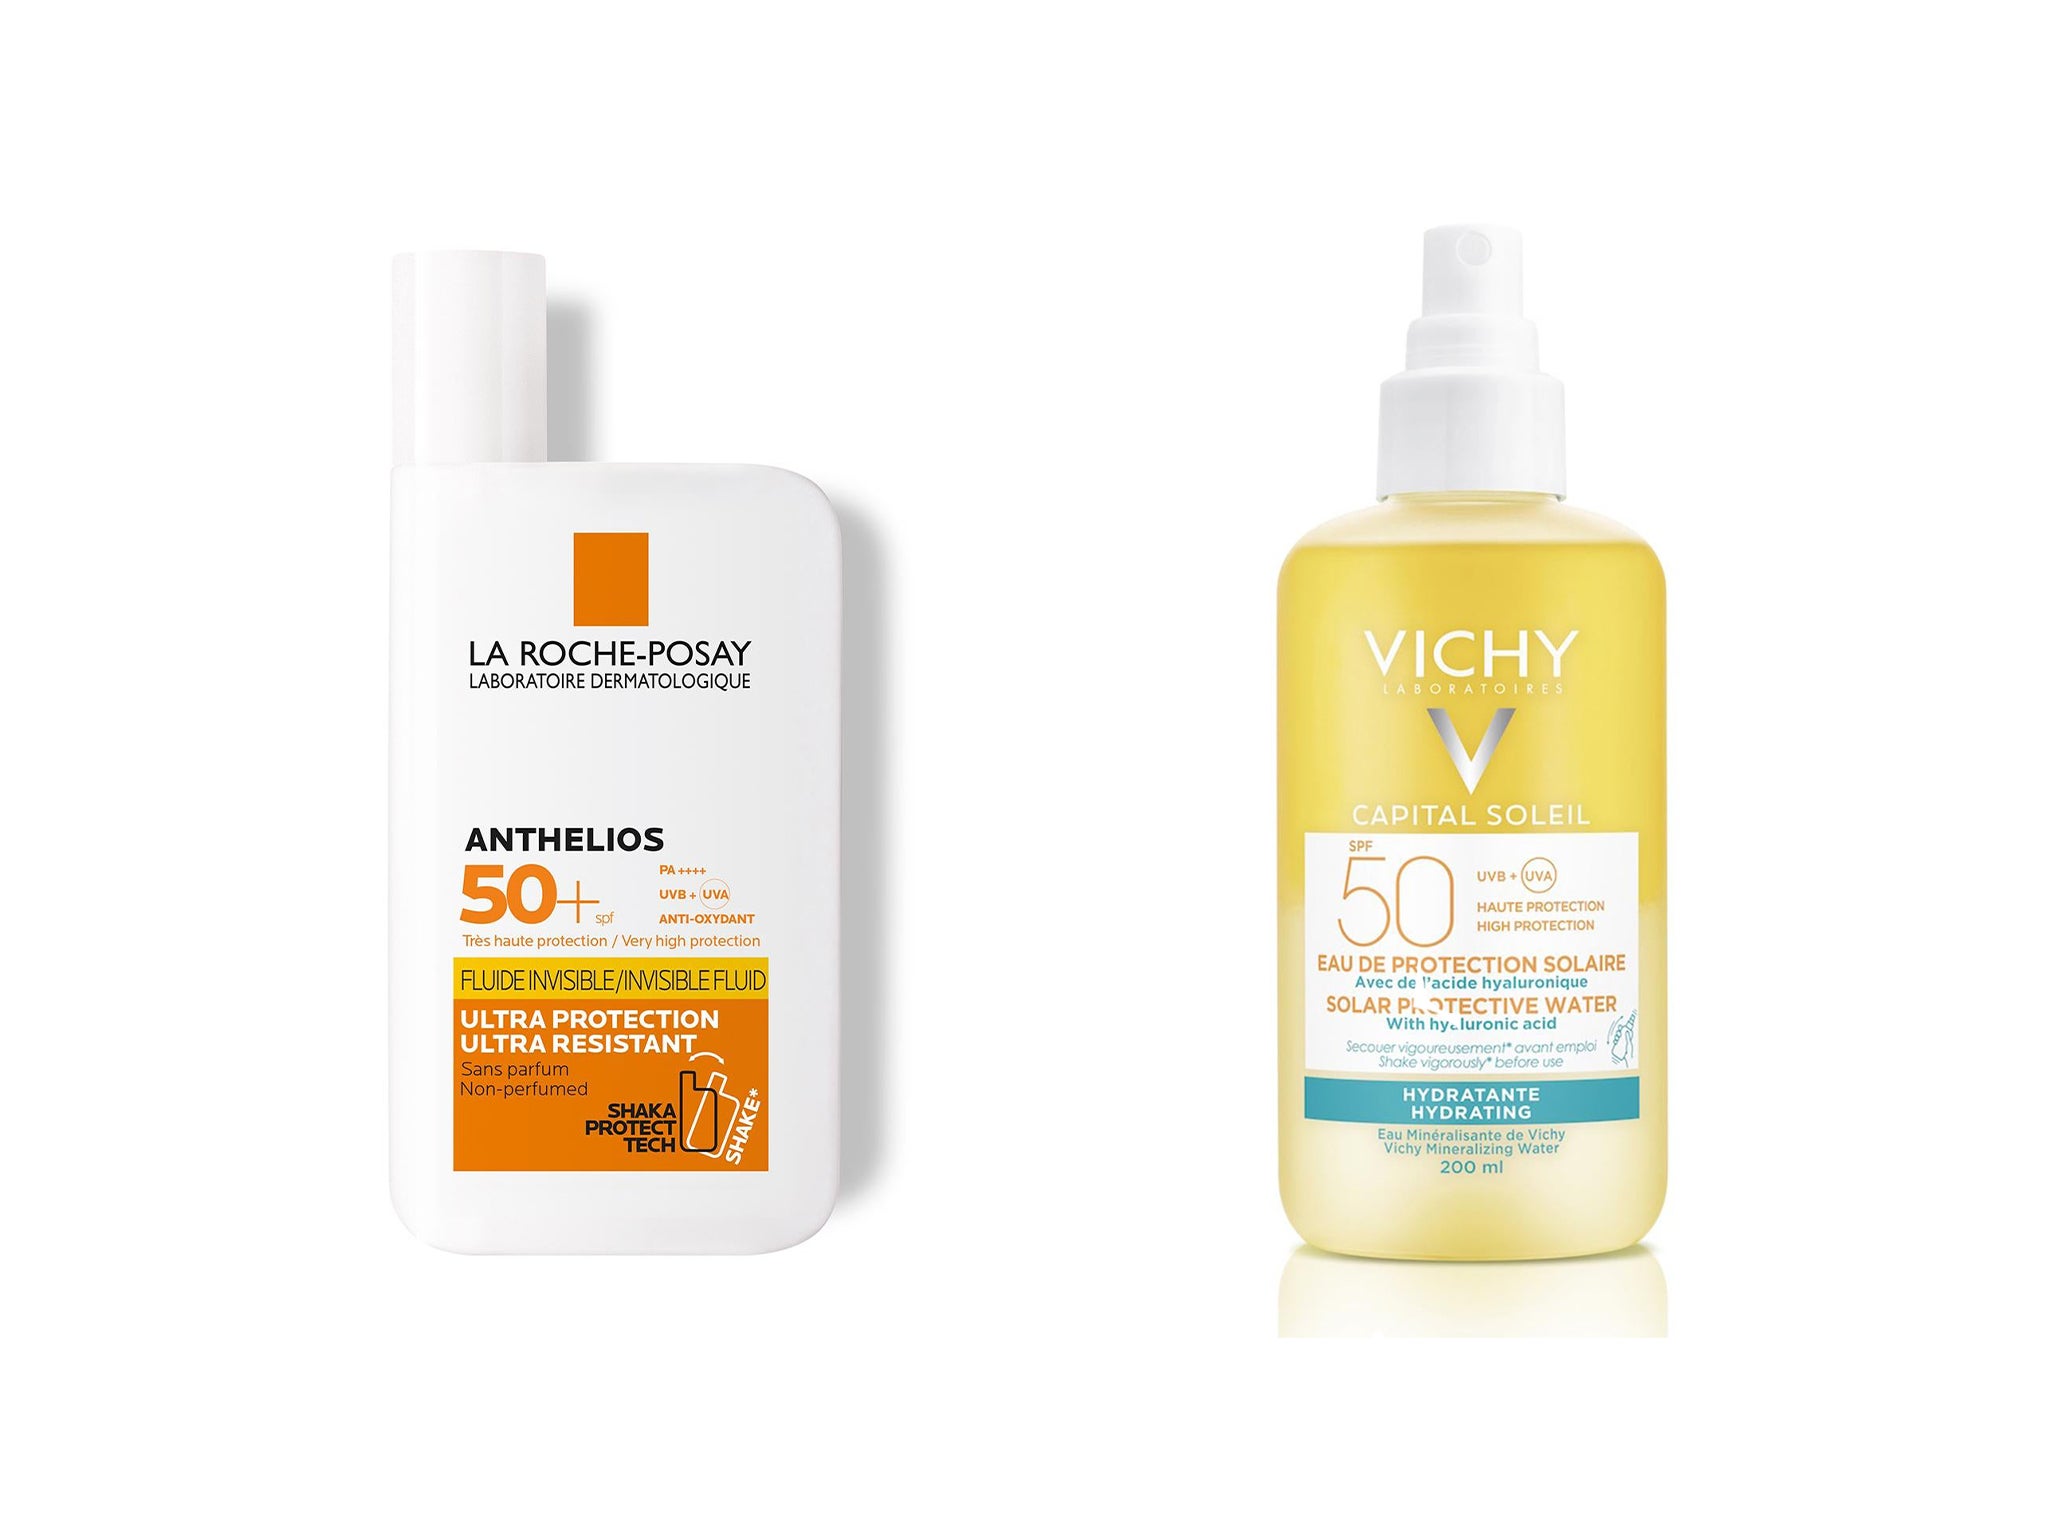 Apply and reapply sunscreen to stay protected during the hot weather on your staycation (left, Boots, right, Vichy)